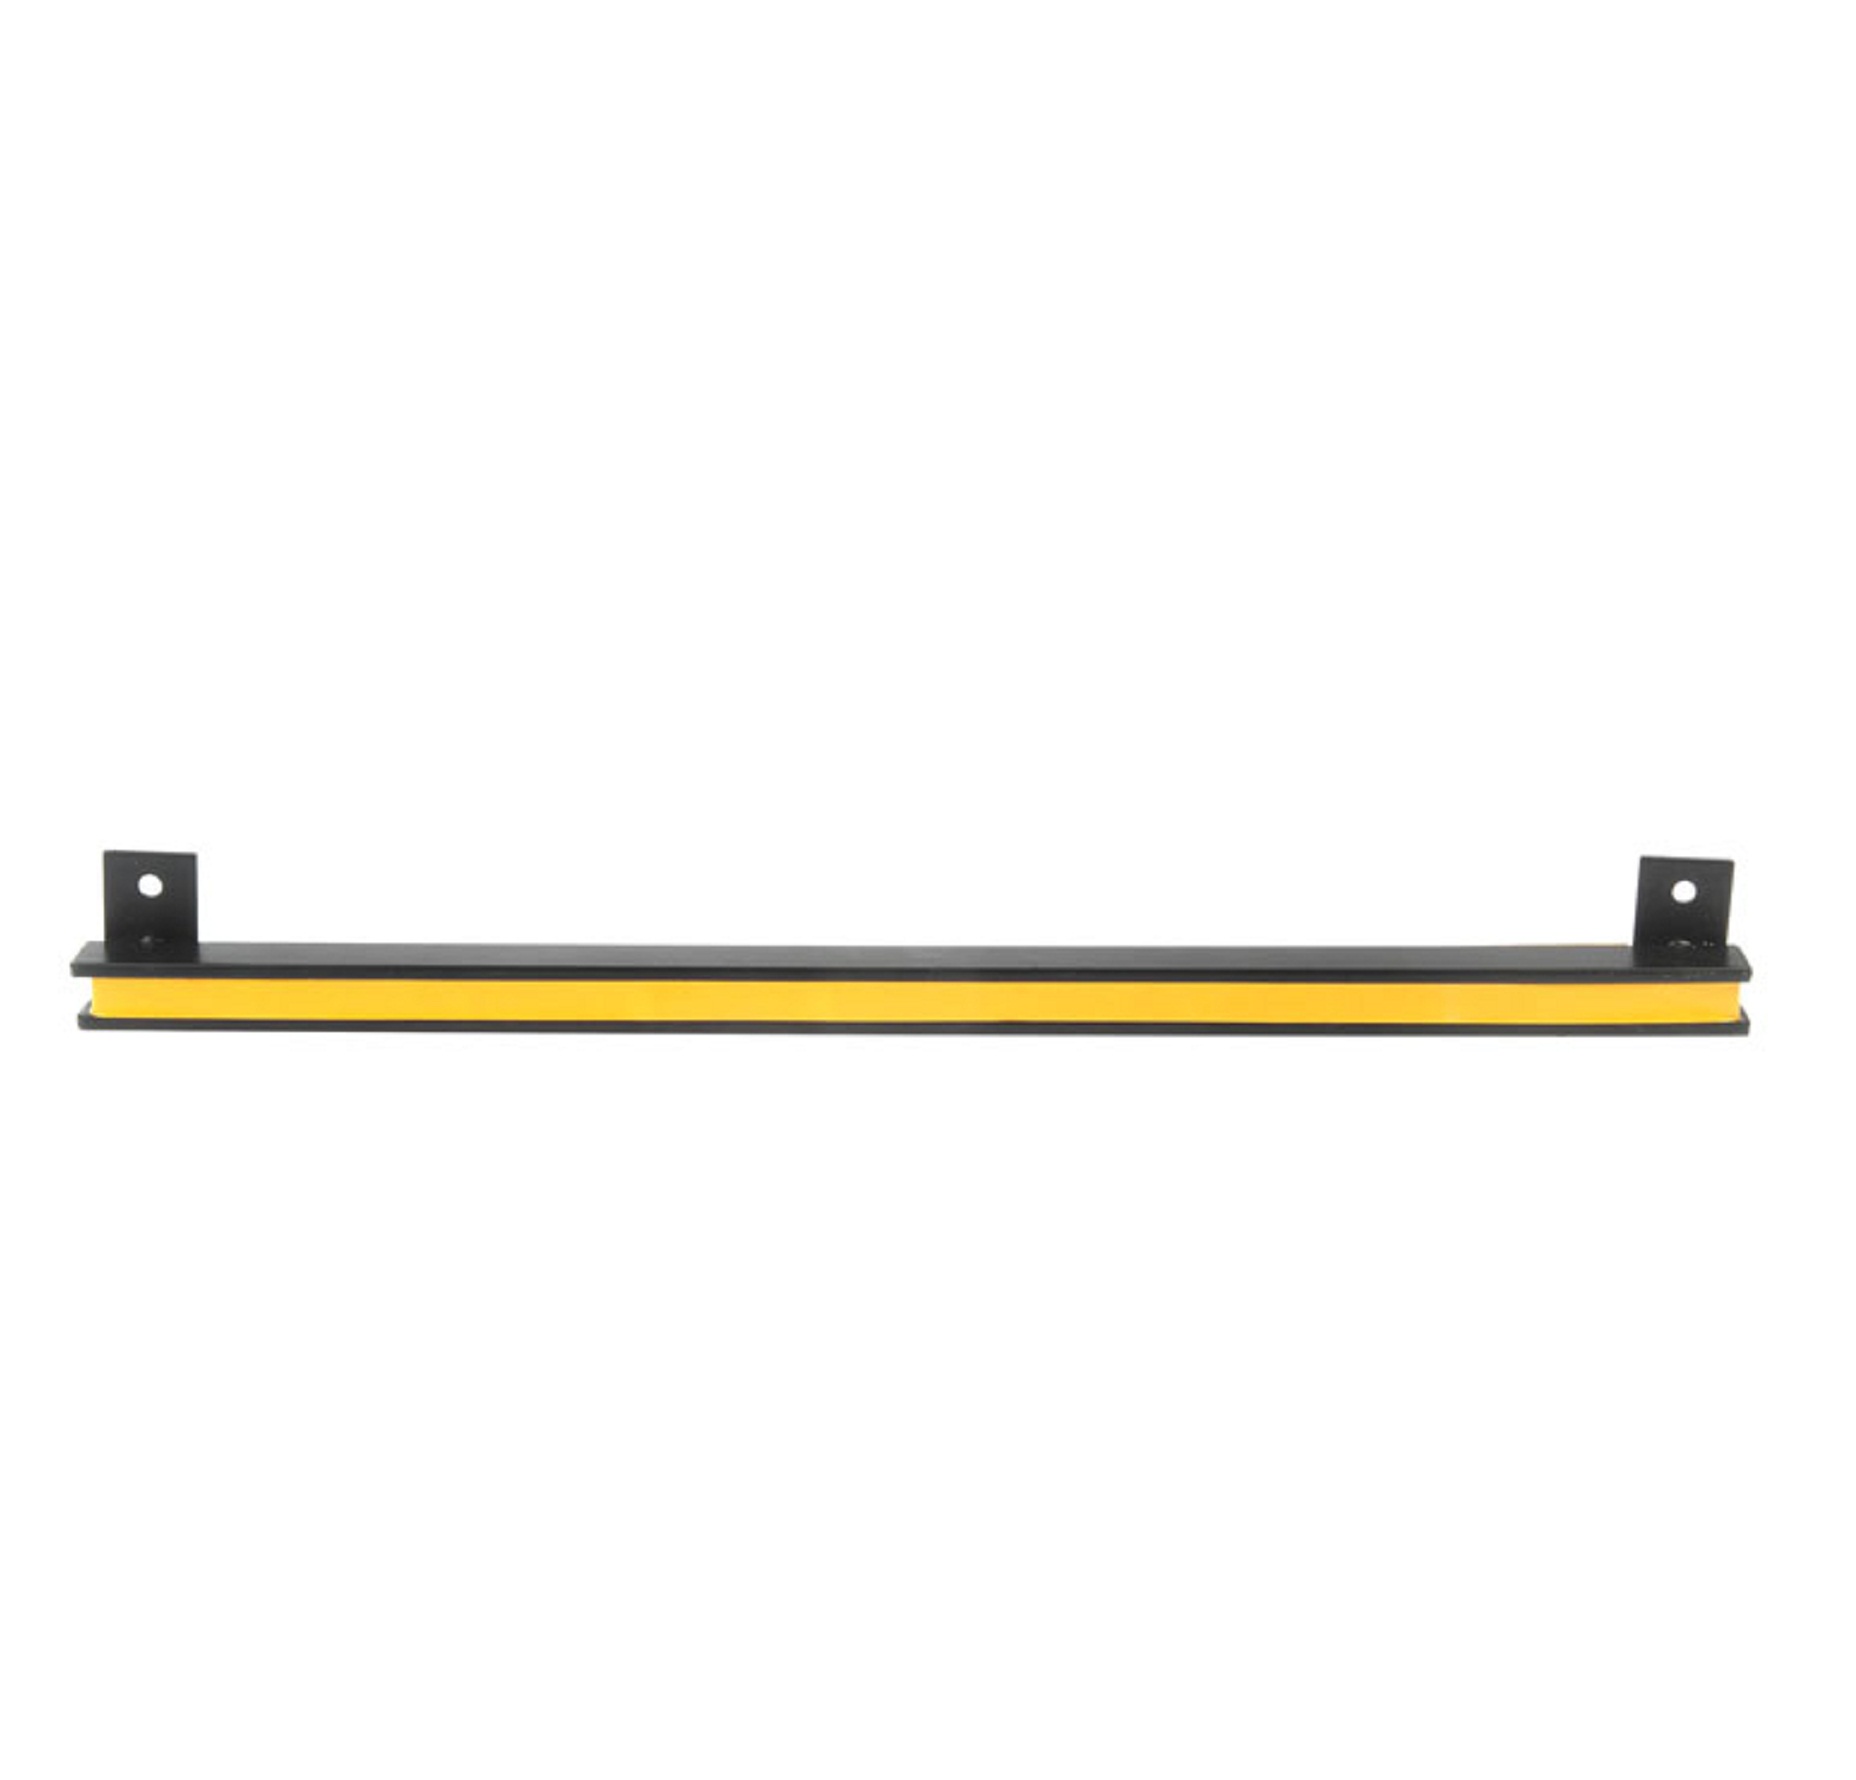 Dorman Products 18 Inch Magnetic Tool Holder